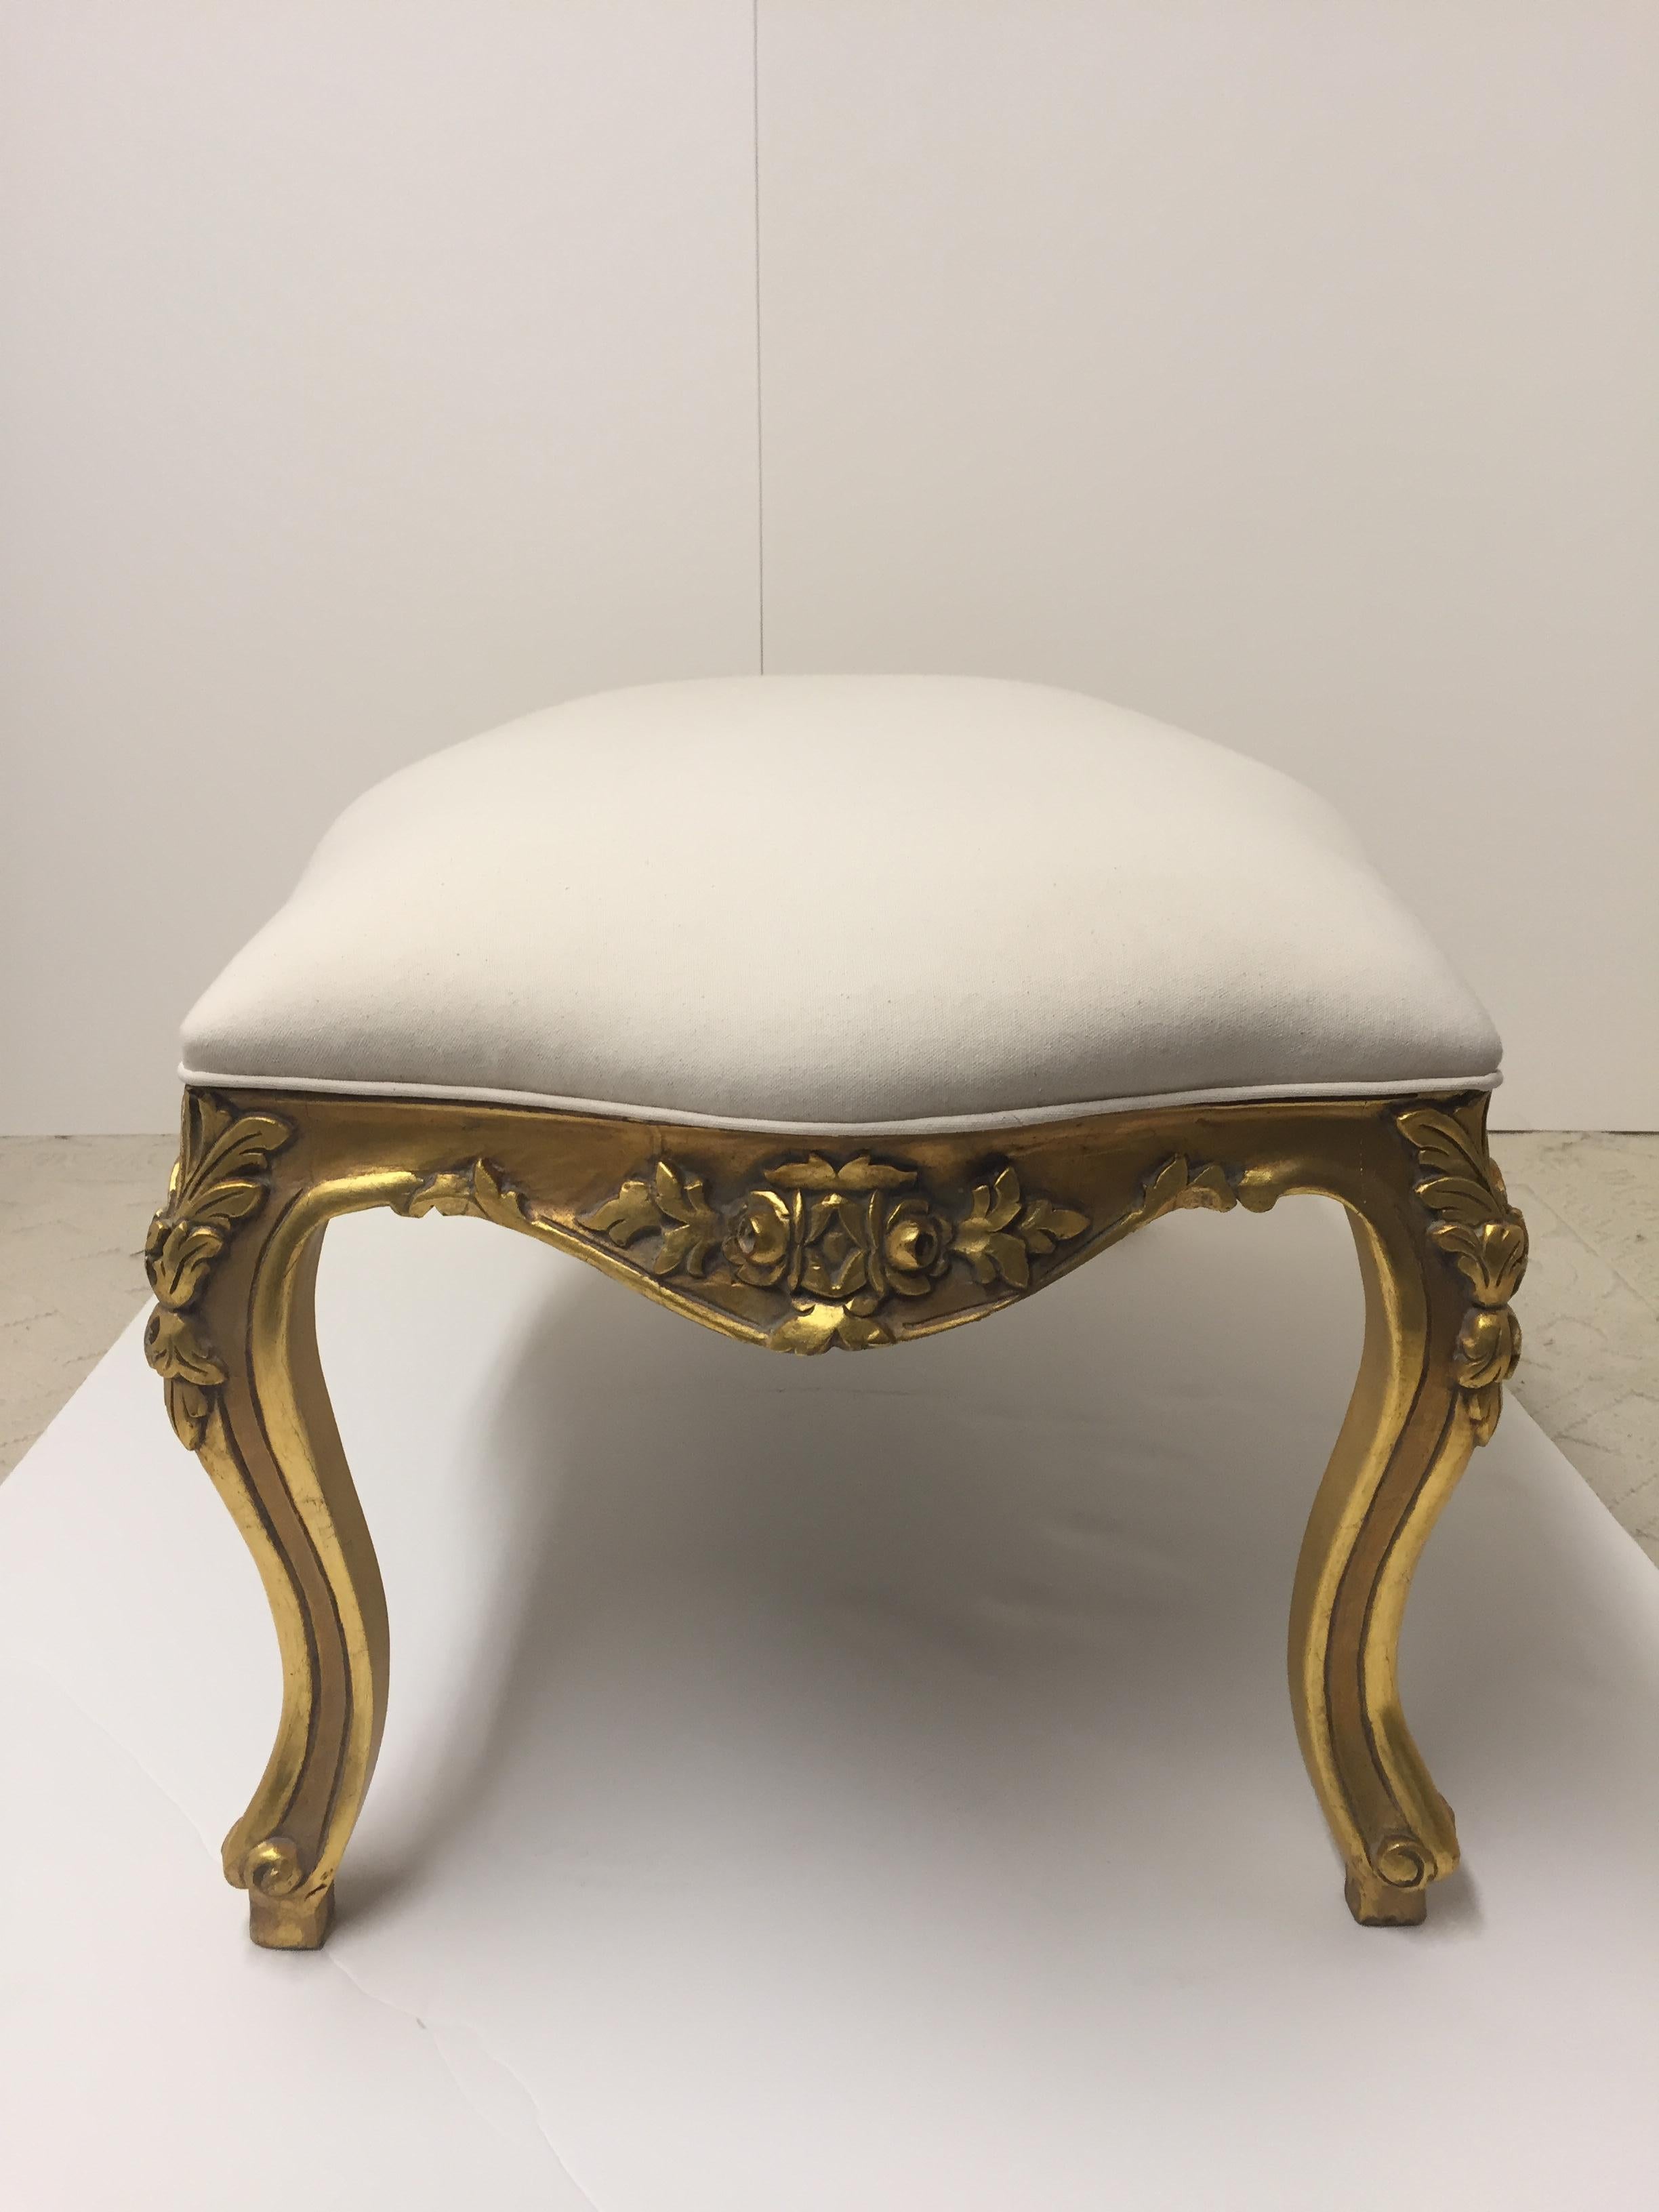 Glamorous giltwood bench with pretty cabriole legs and carving, newly upholstered in elegant white cotton duck.
 